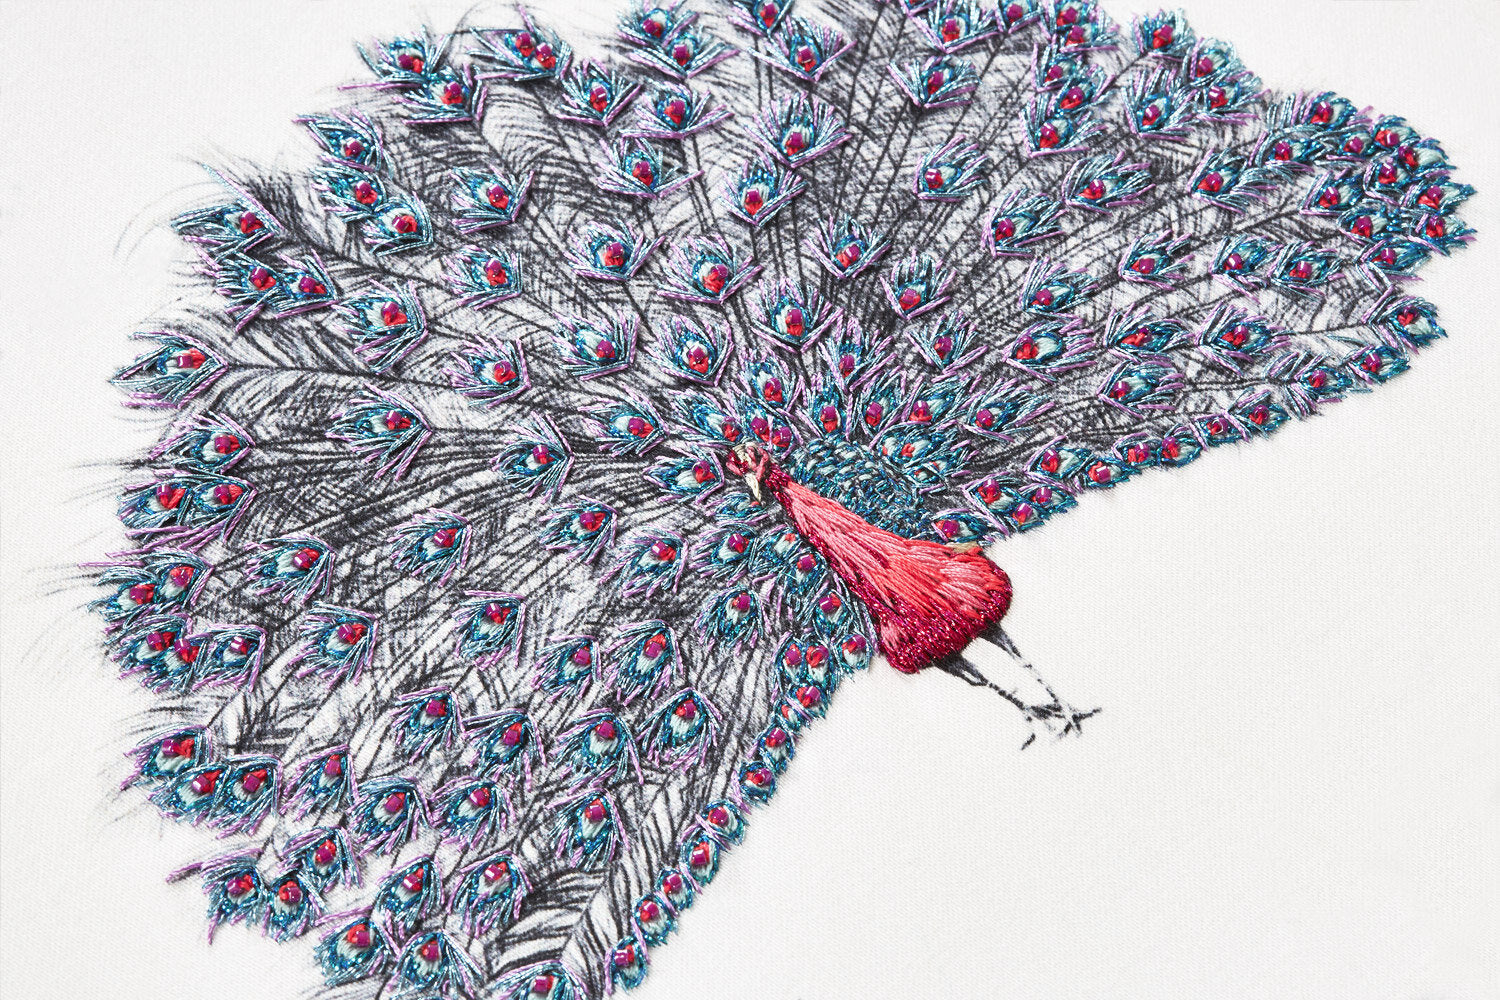 Embroidered Peacock